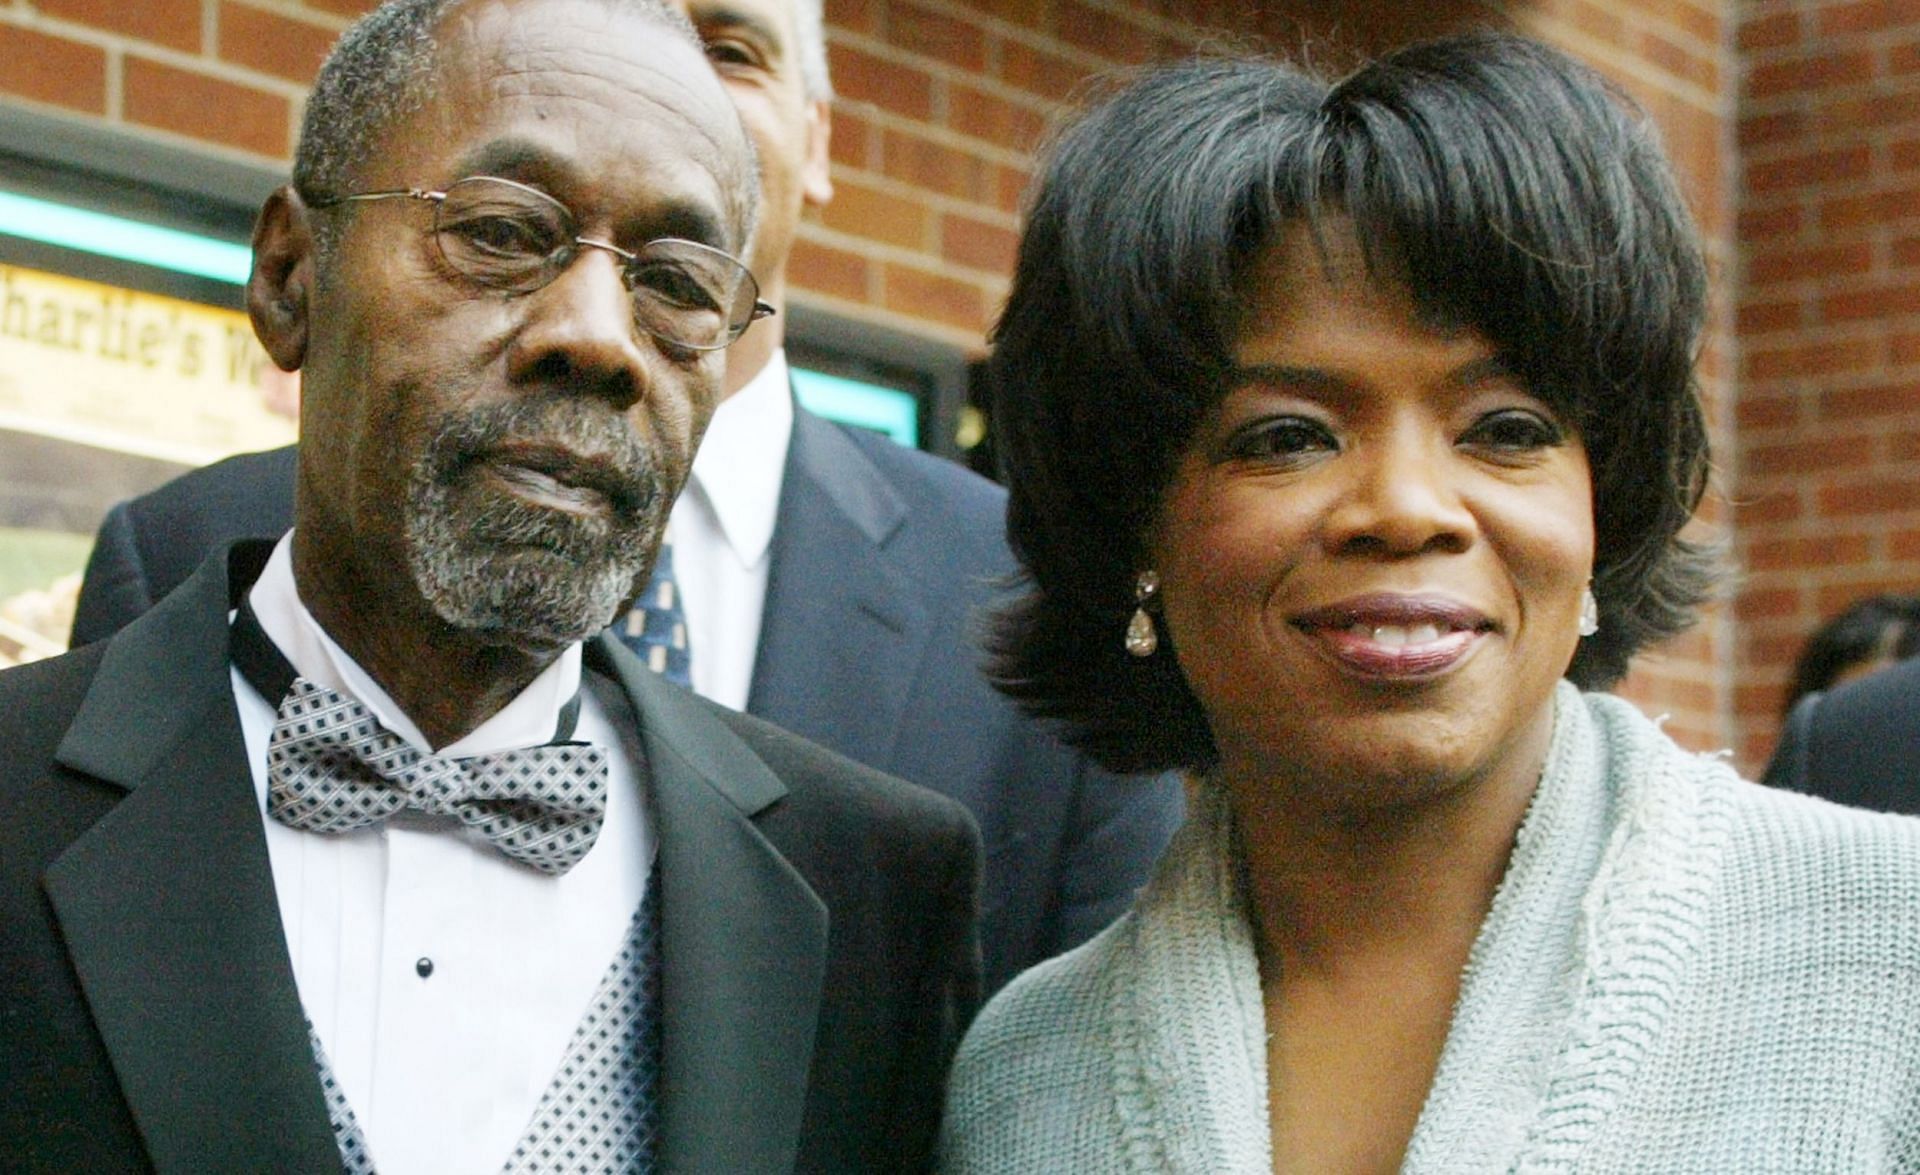 Oprah Winfrey and her father Vernon in 2003 (Image via Adriane Jaeckle/Getty Images)